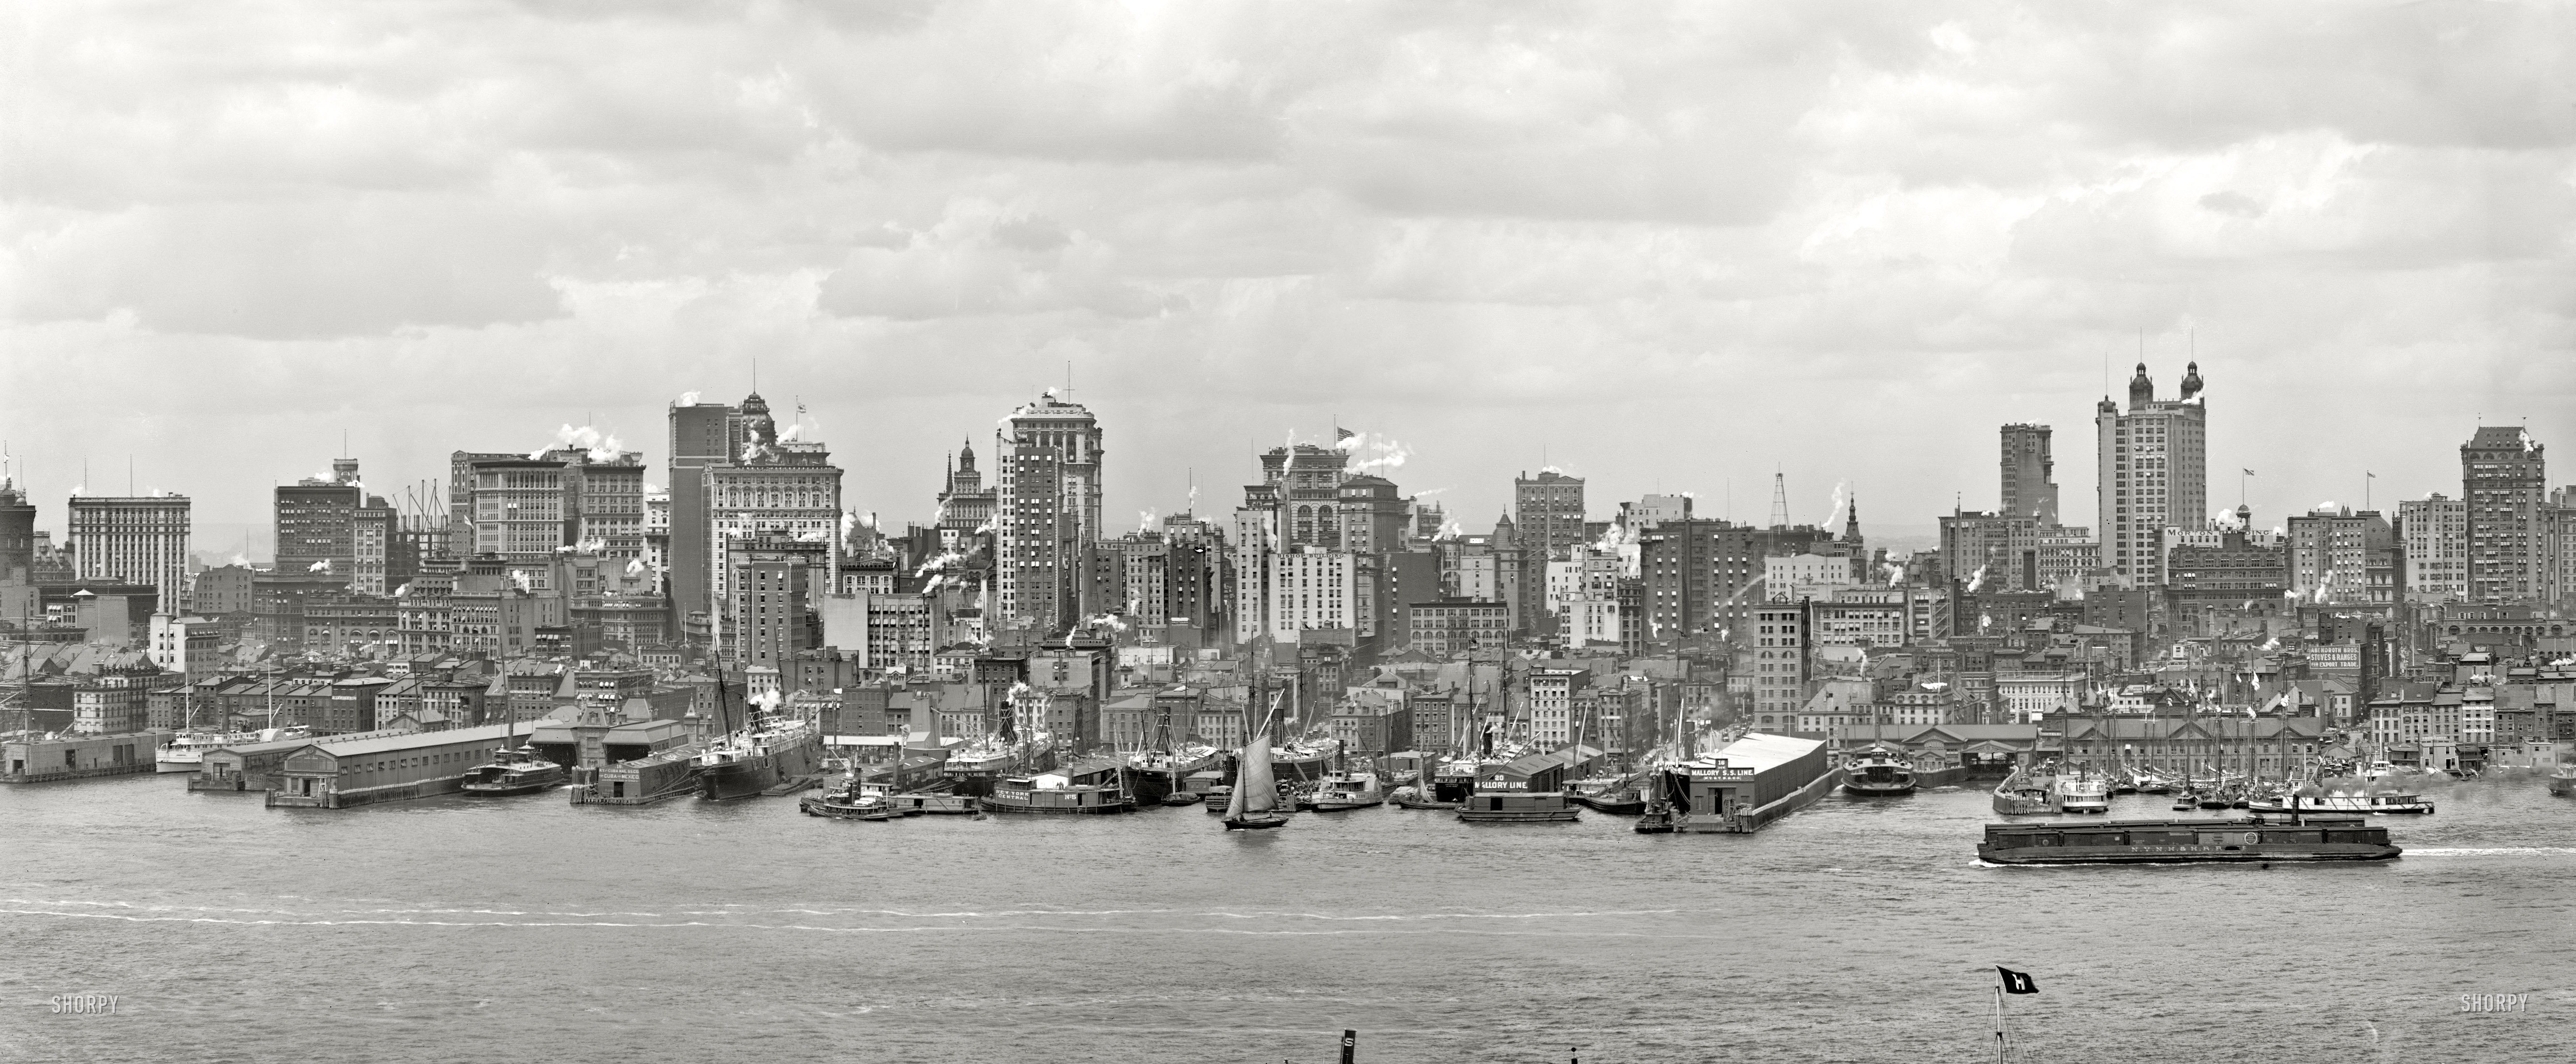 New York circa 1906. "Manhattan skyline and East River." Panorama of two 8x10 inch glass negatives. Detroit Publishing Company. View full size.